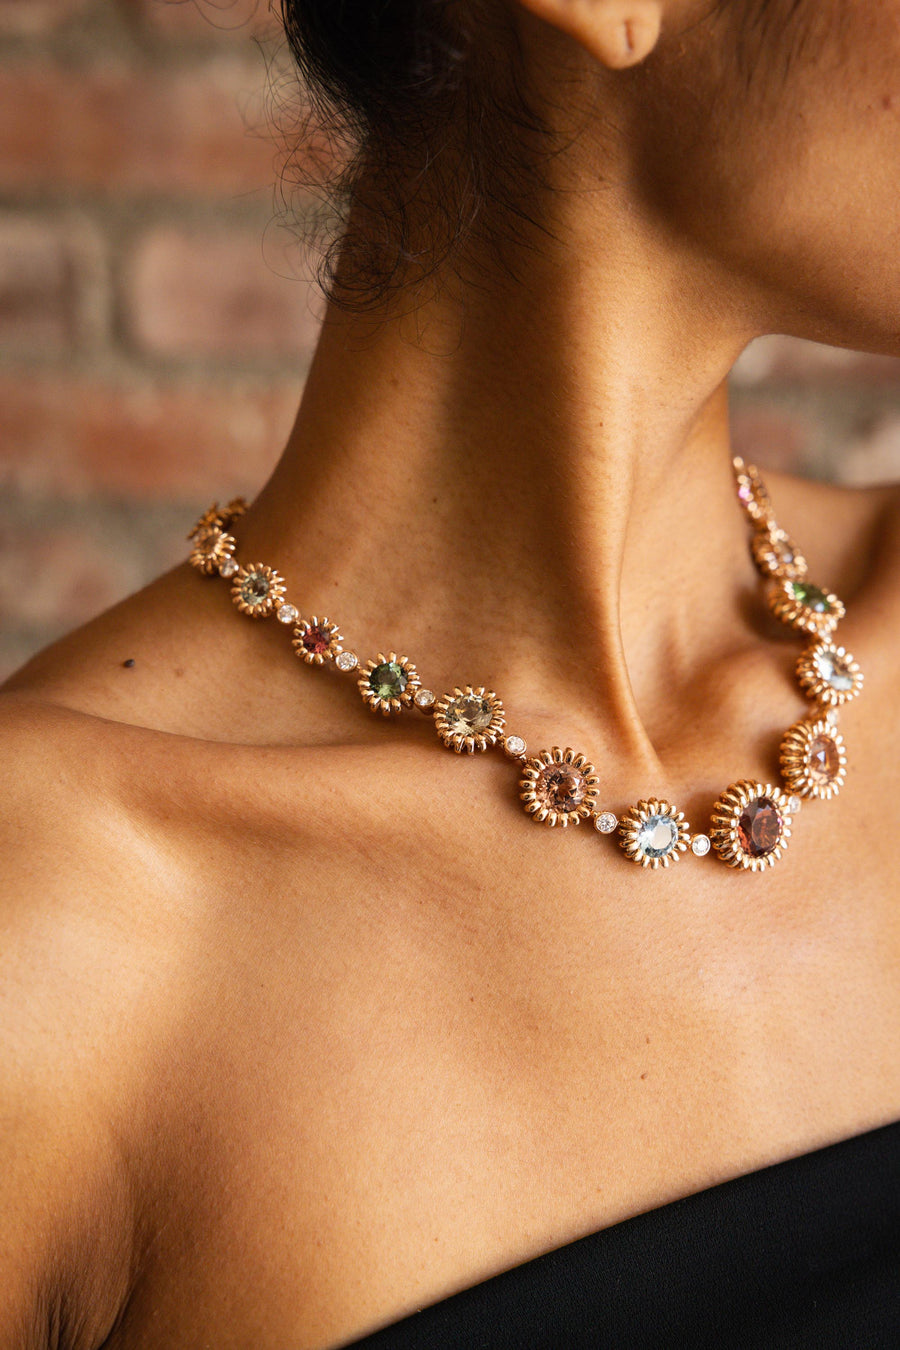 Necklace in 18K pink gold set with tourmalines, aquamarines, morganite and diamonds